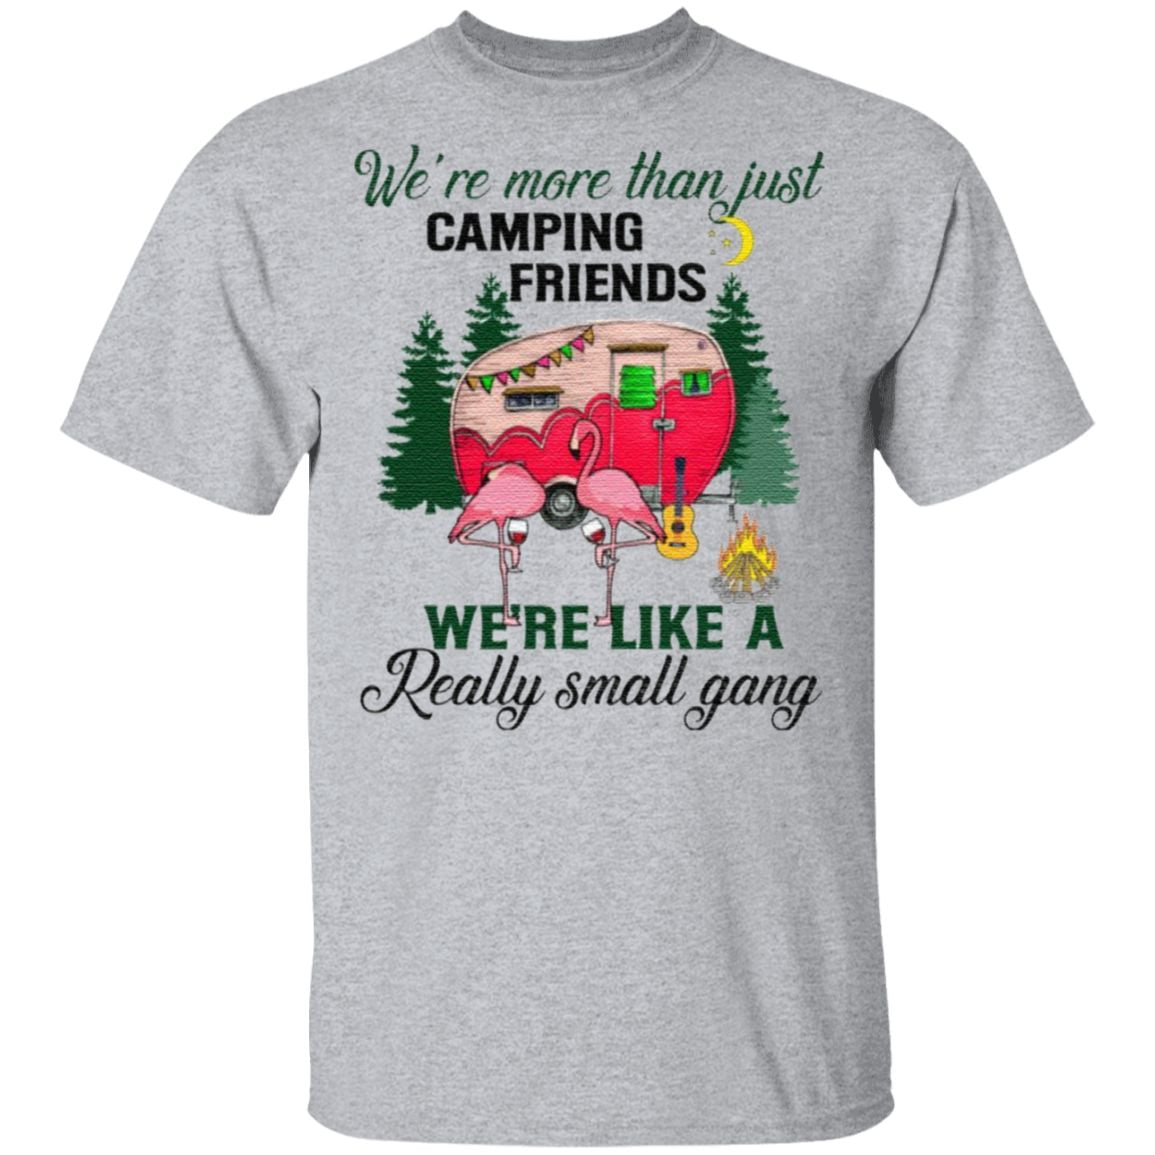 We Are More Than Just Camping Friends We’re Like A Really Small Gang T-Shirt